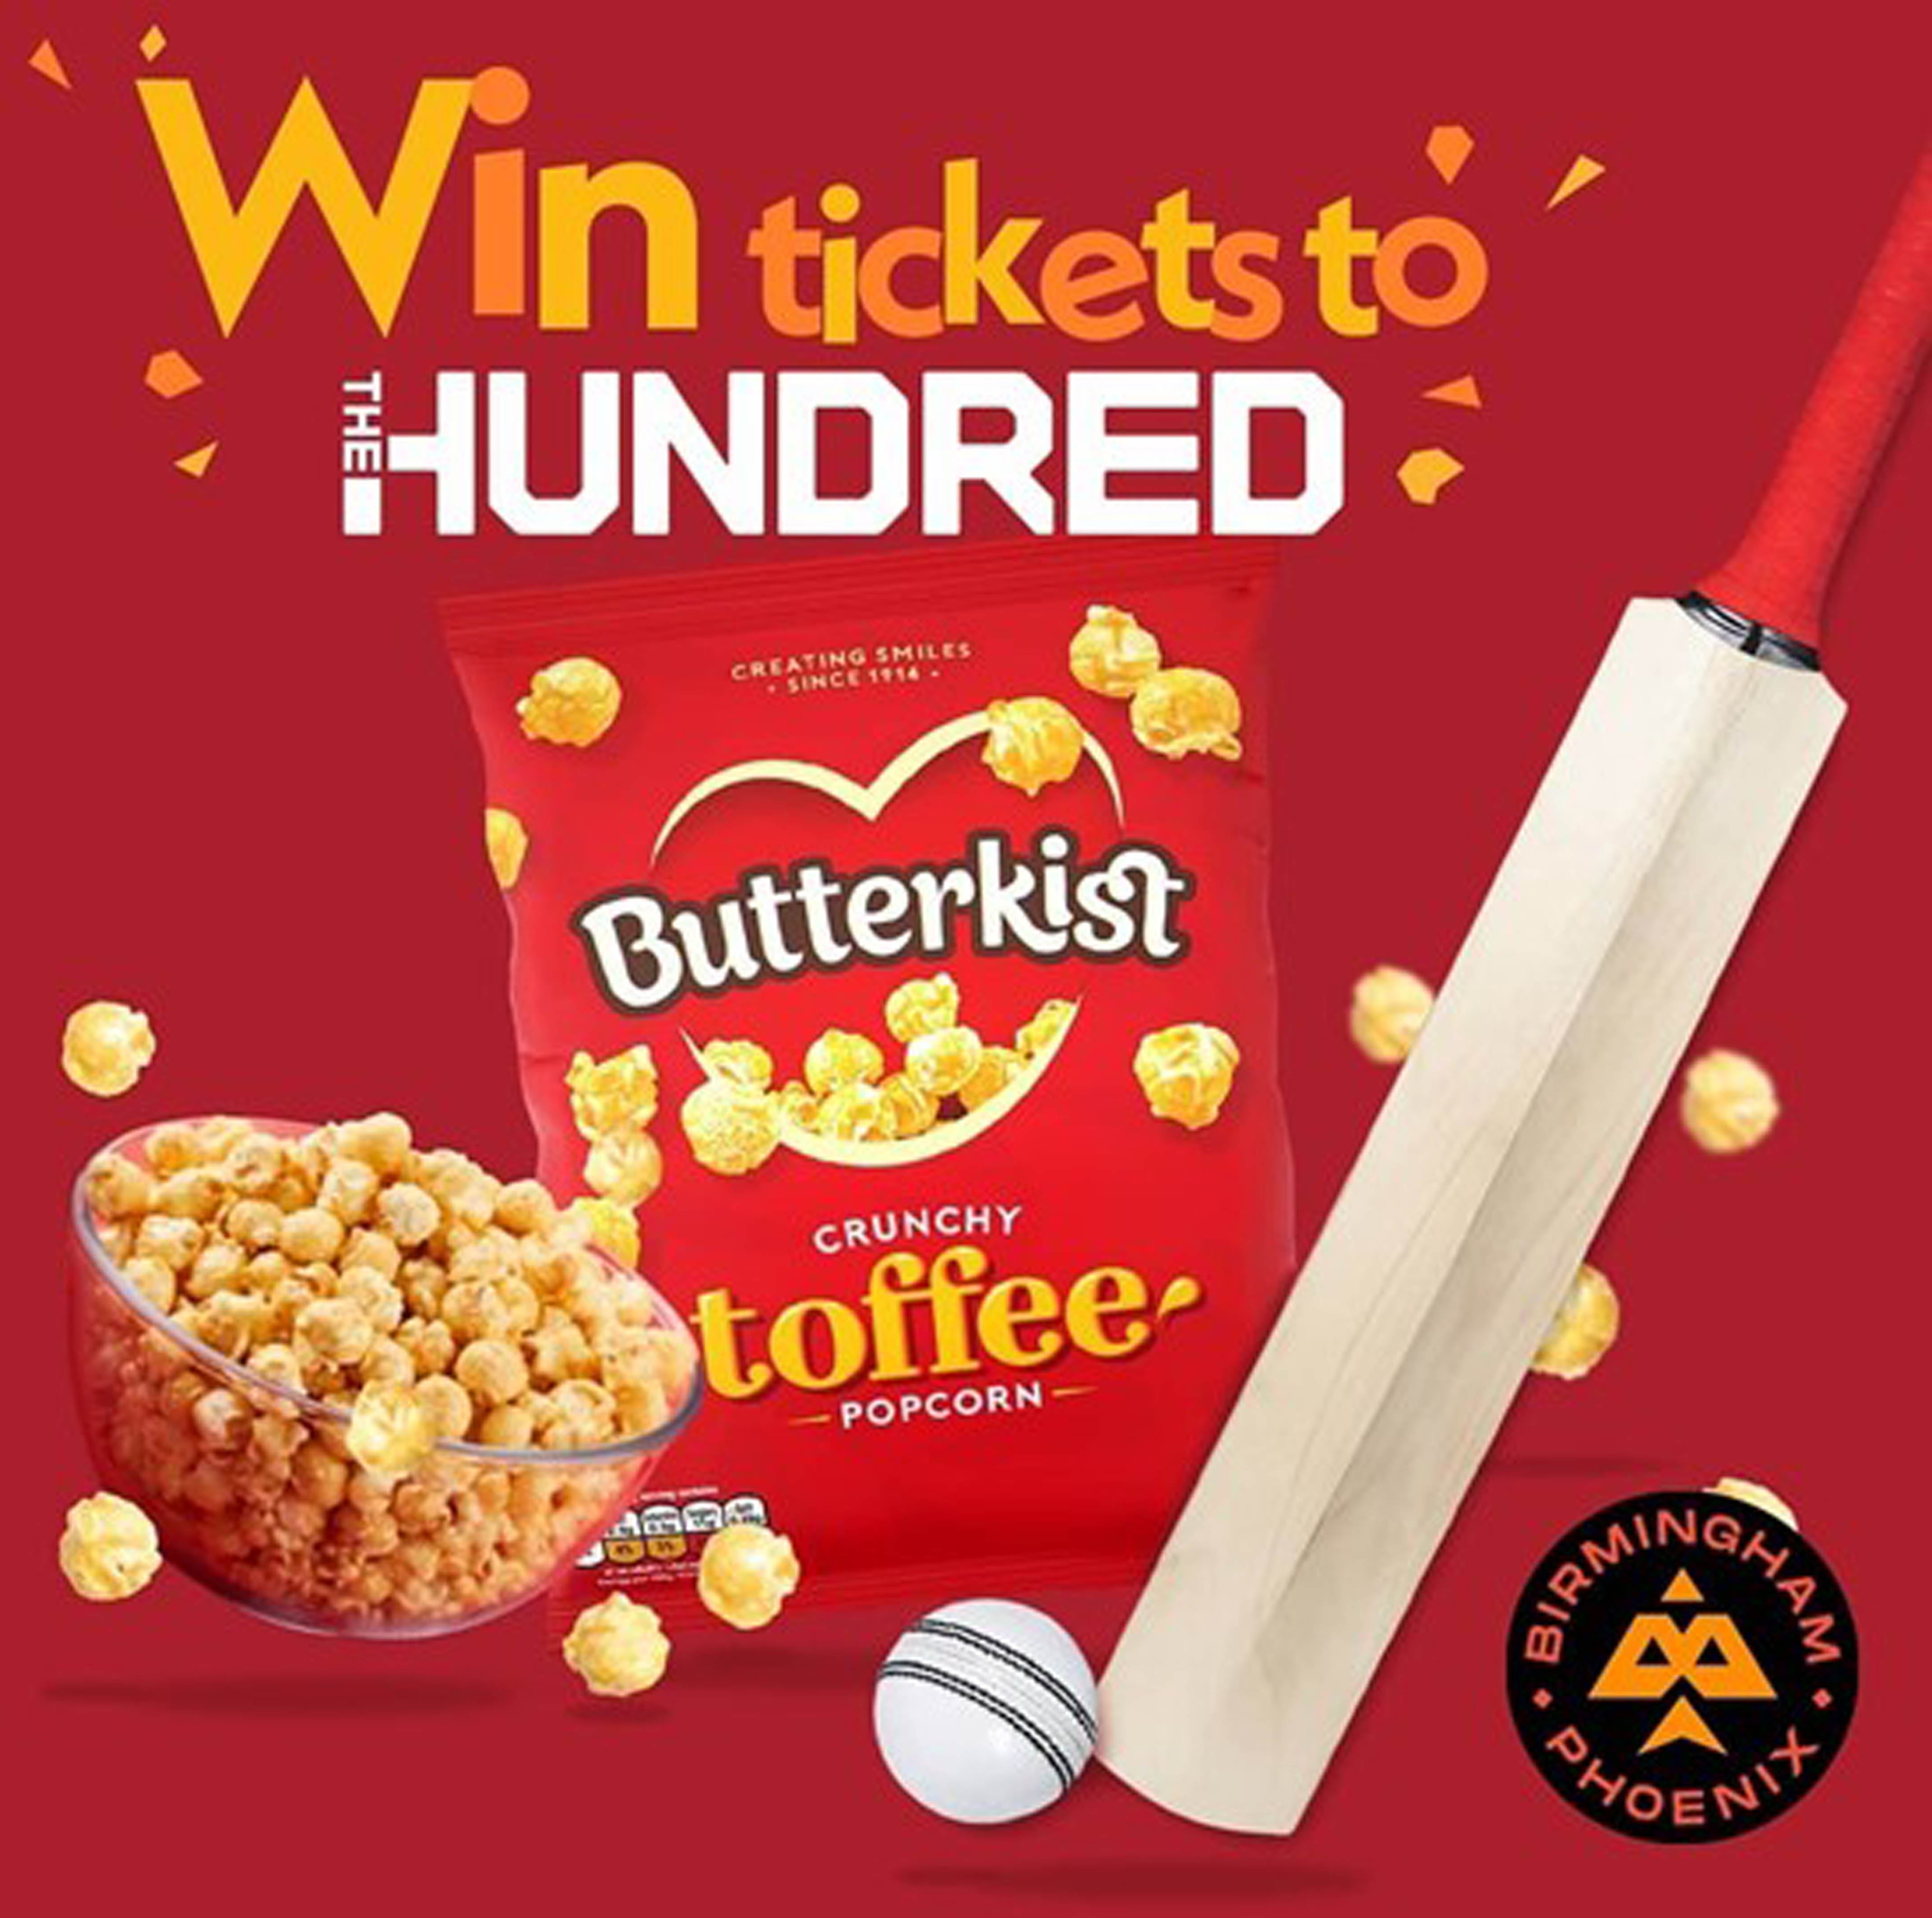 The ad for The Hundred featuring KP Snacks brand Butterkist (ASA/PA)